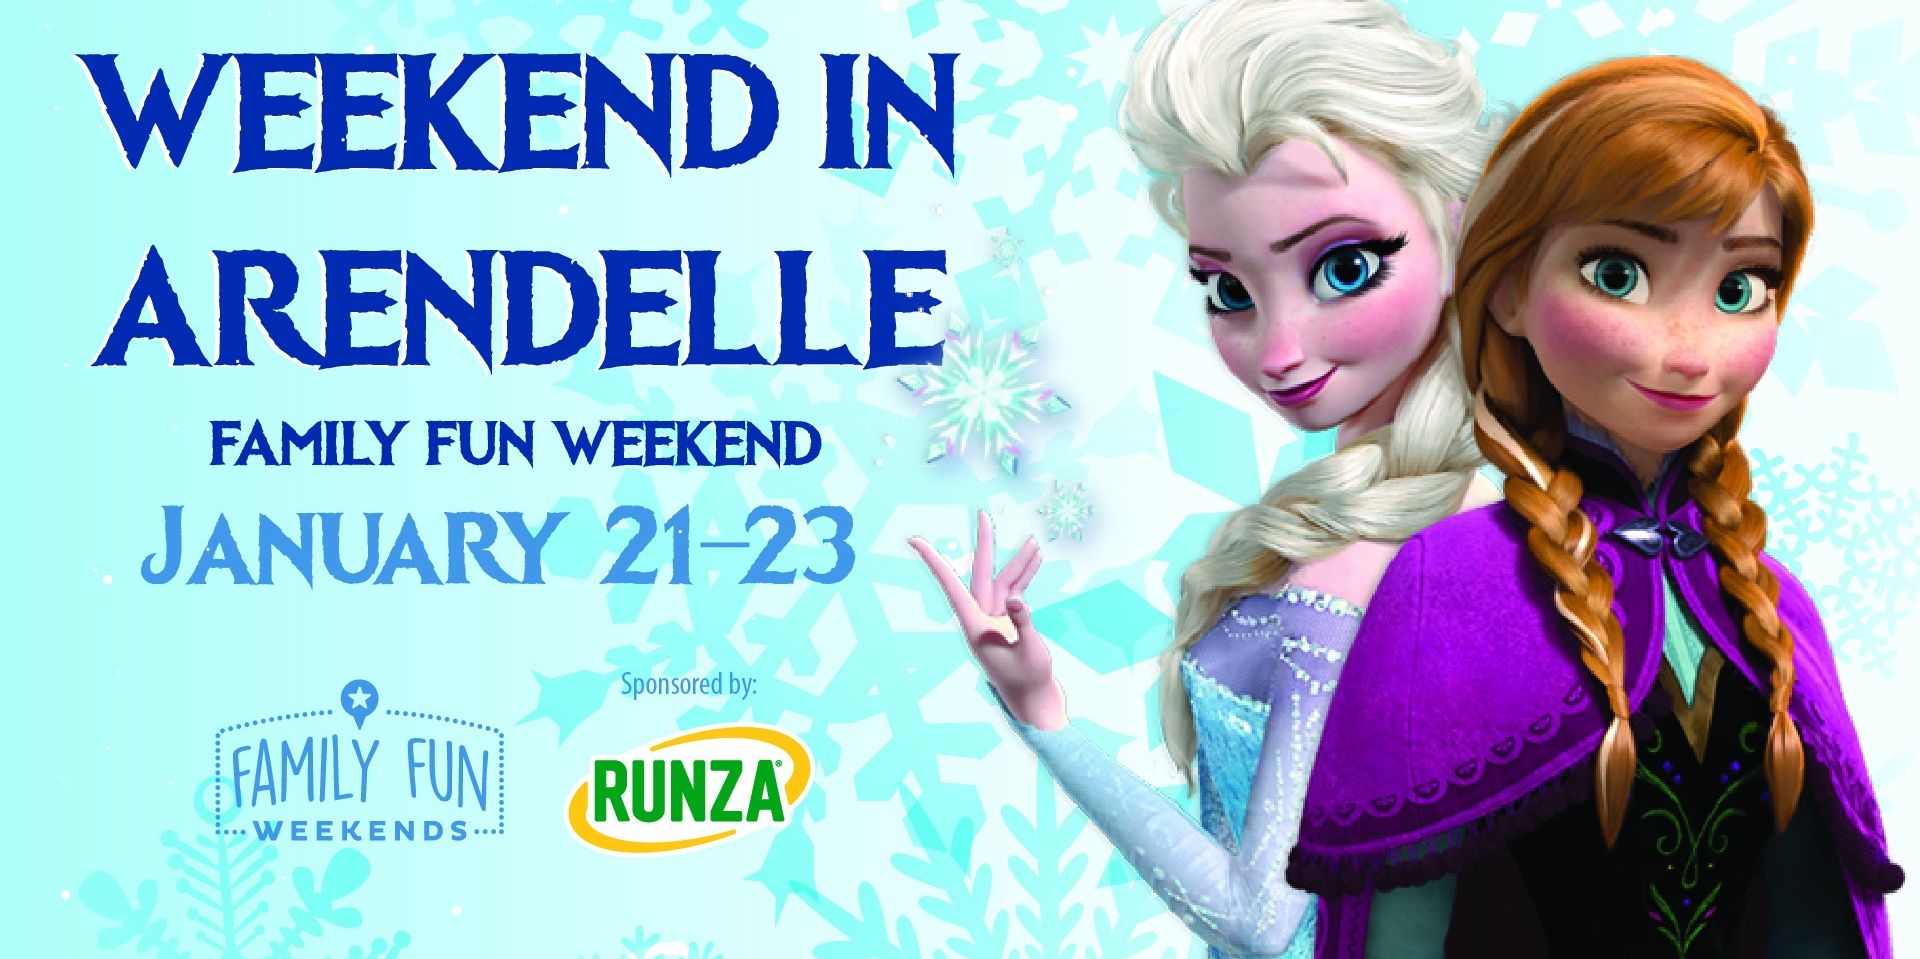 Weekend At Arendelle promotional image